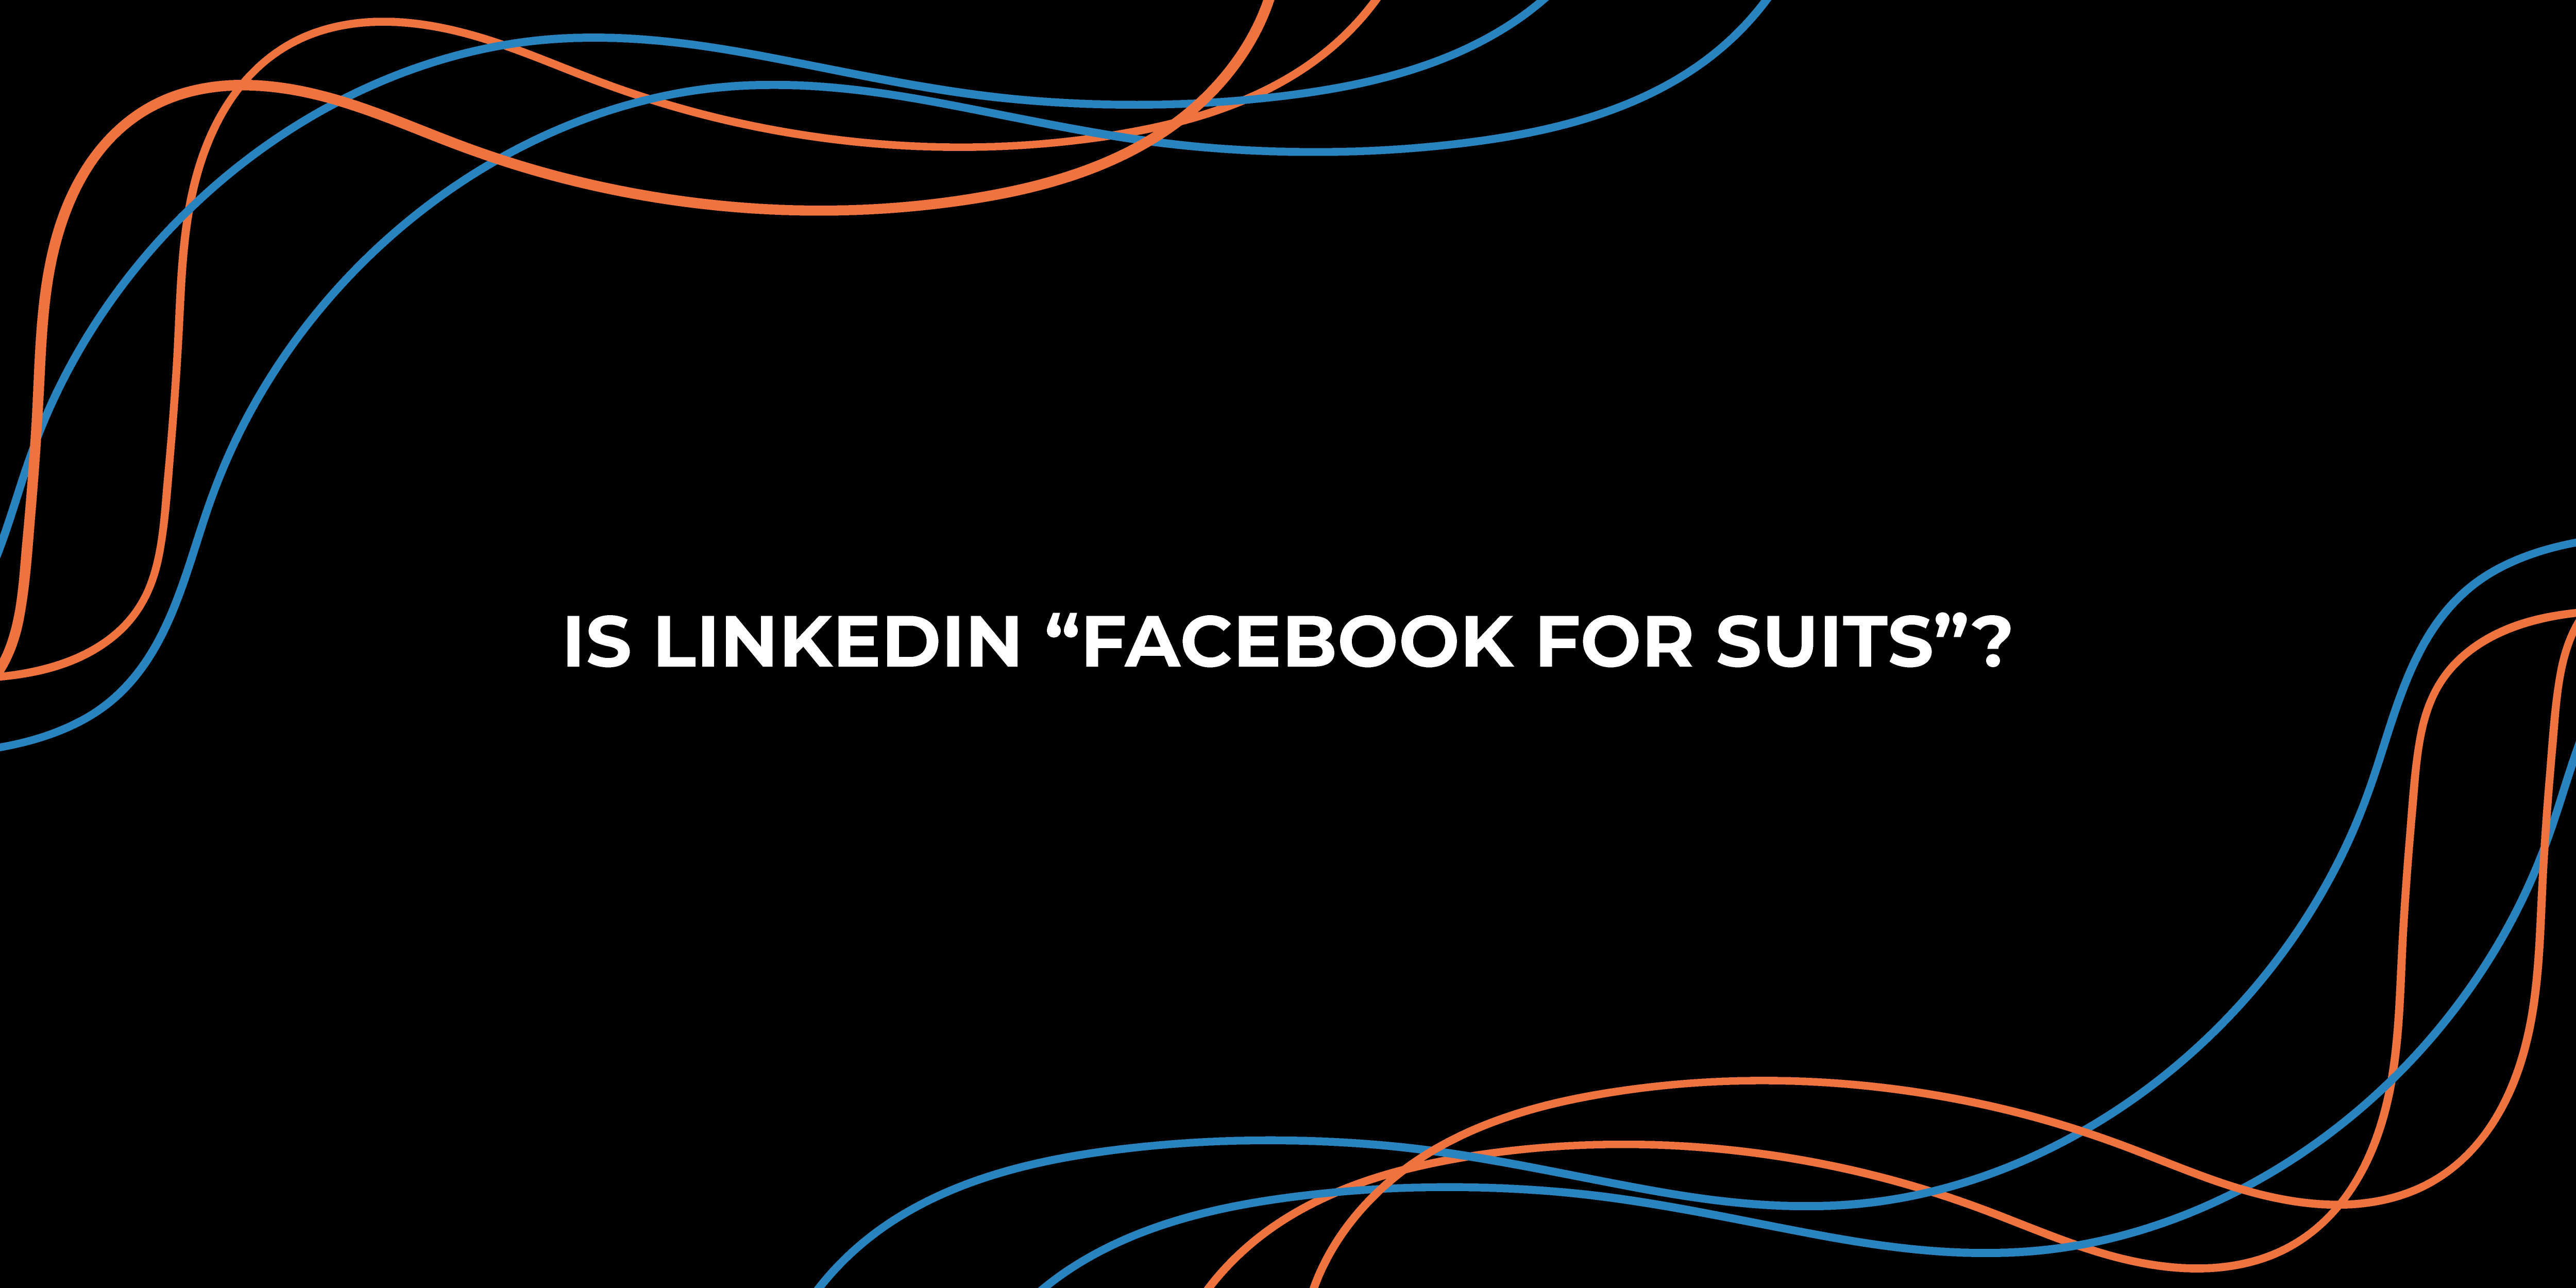 Is LinkedIn "Facebook for suits"?